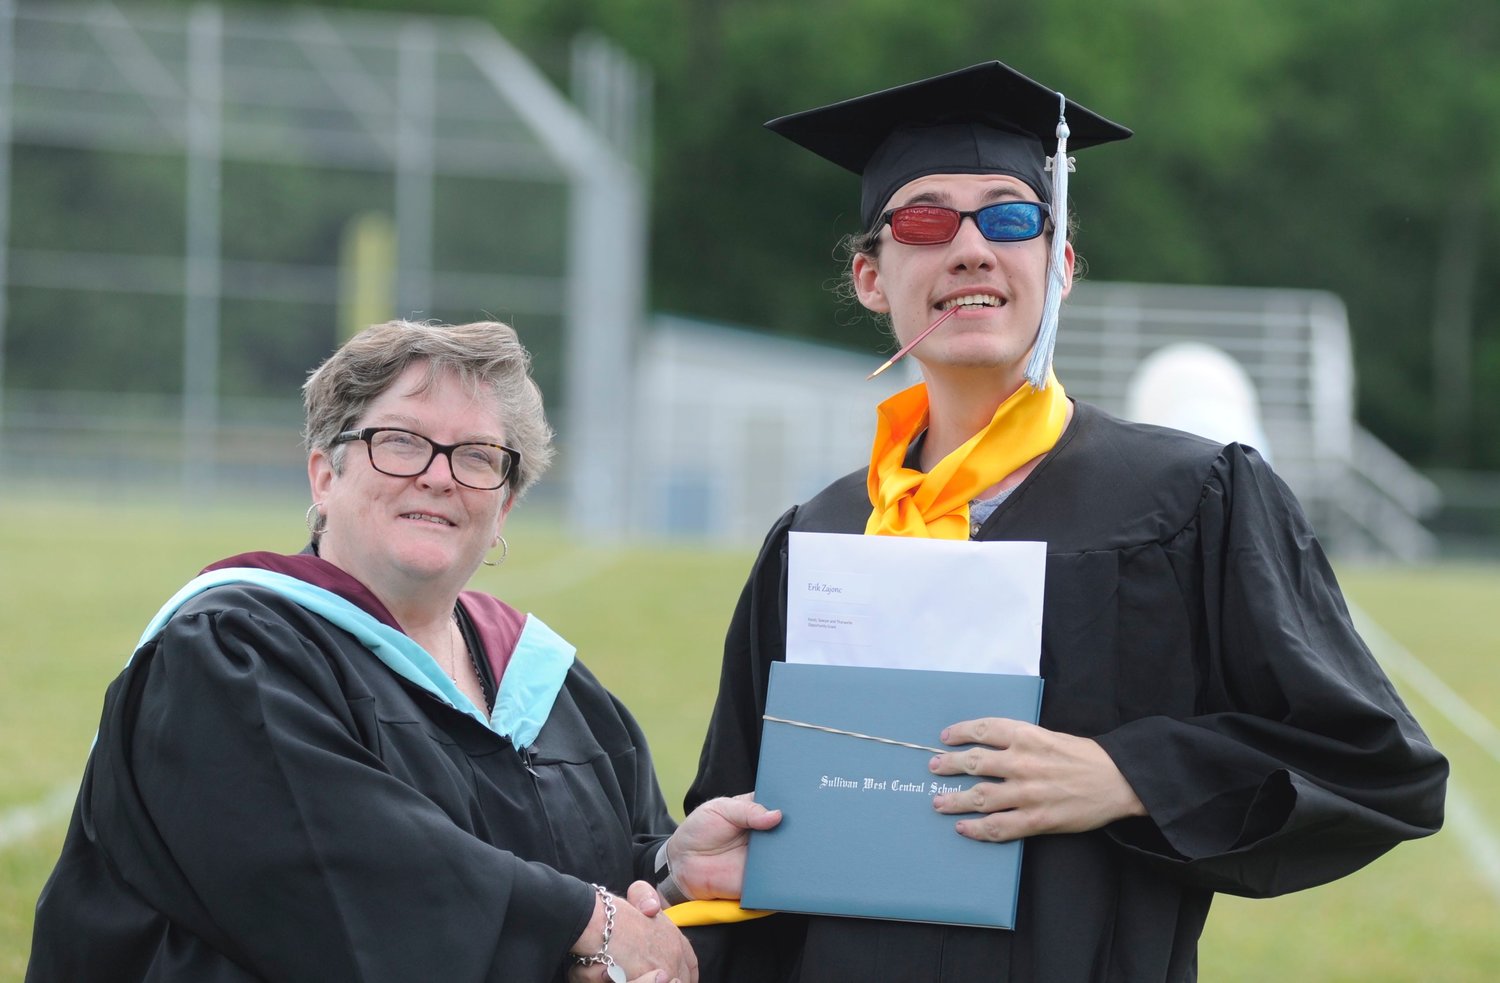 A stylish finish. Alphabetically speaking, Erik Zajonc, right, was the last senior to receive his diploma. But the self-described “aspiring artist” showed a bit of colorful artistic flair as he was awarded his sheepskin by board of education president Rose Joyce-Turner.